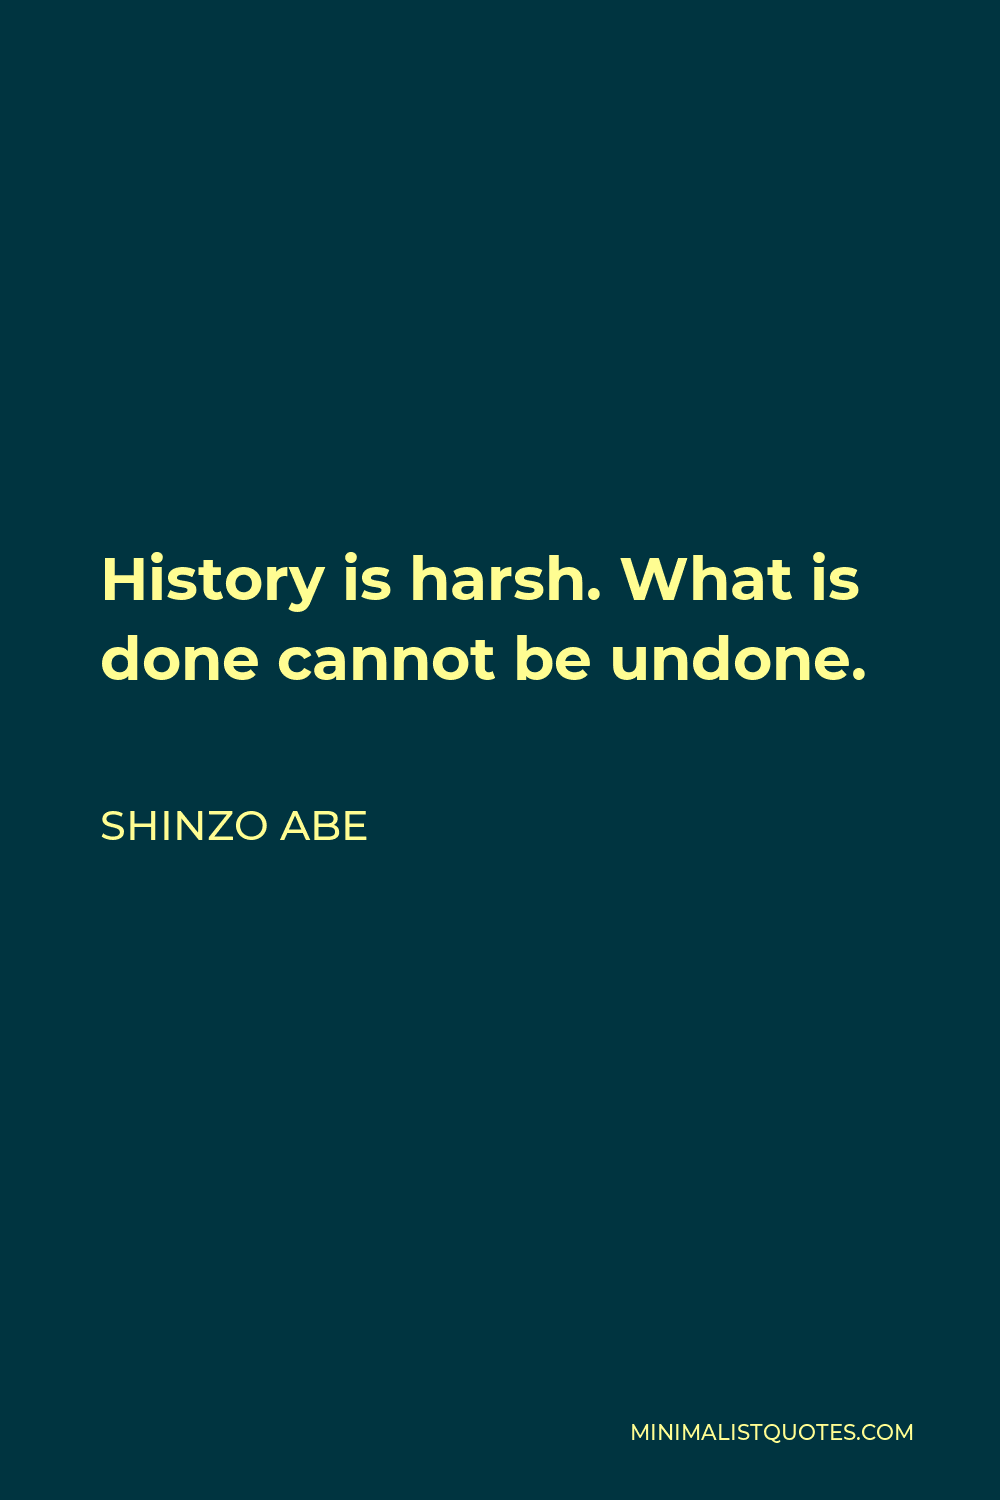 Shinzo Abe Quote - History is harsh. What is done cannot be undone.